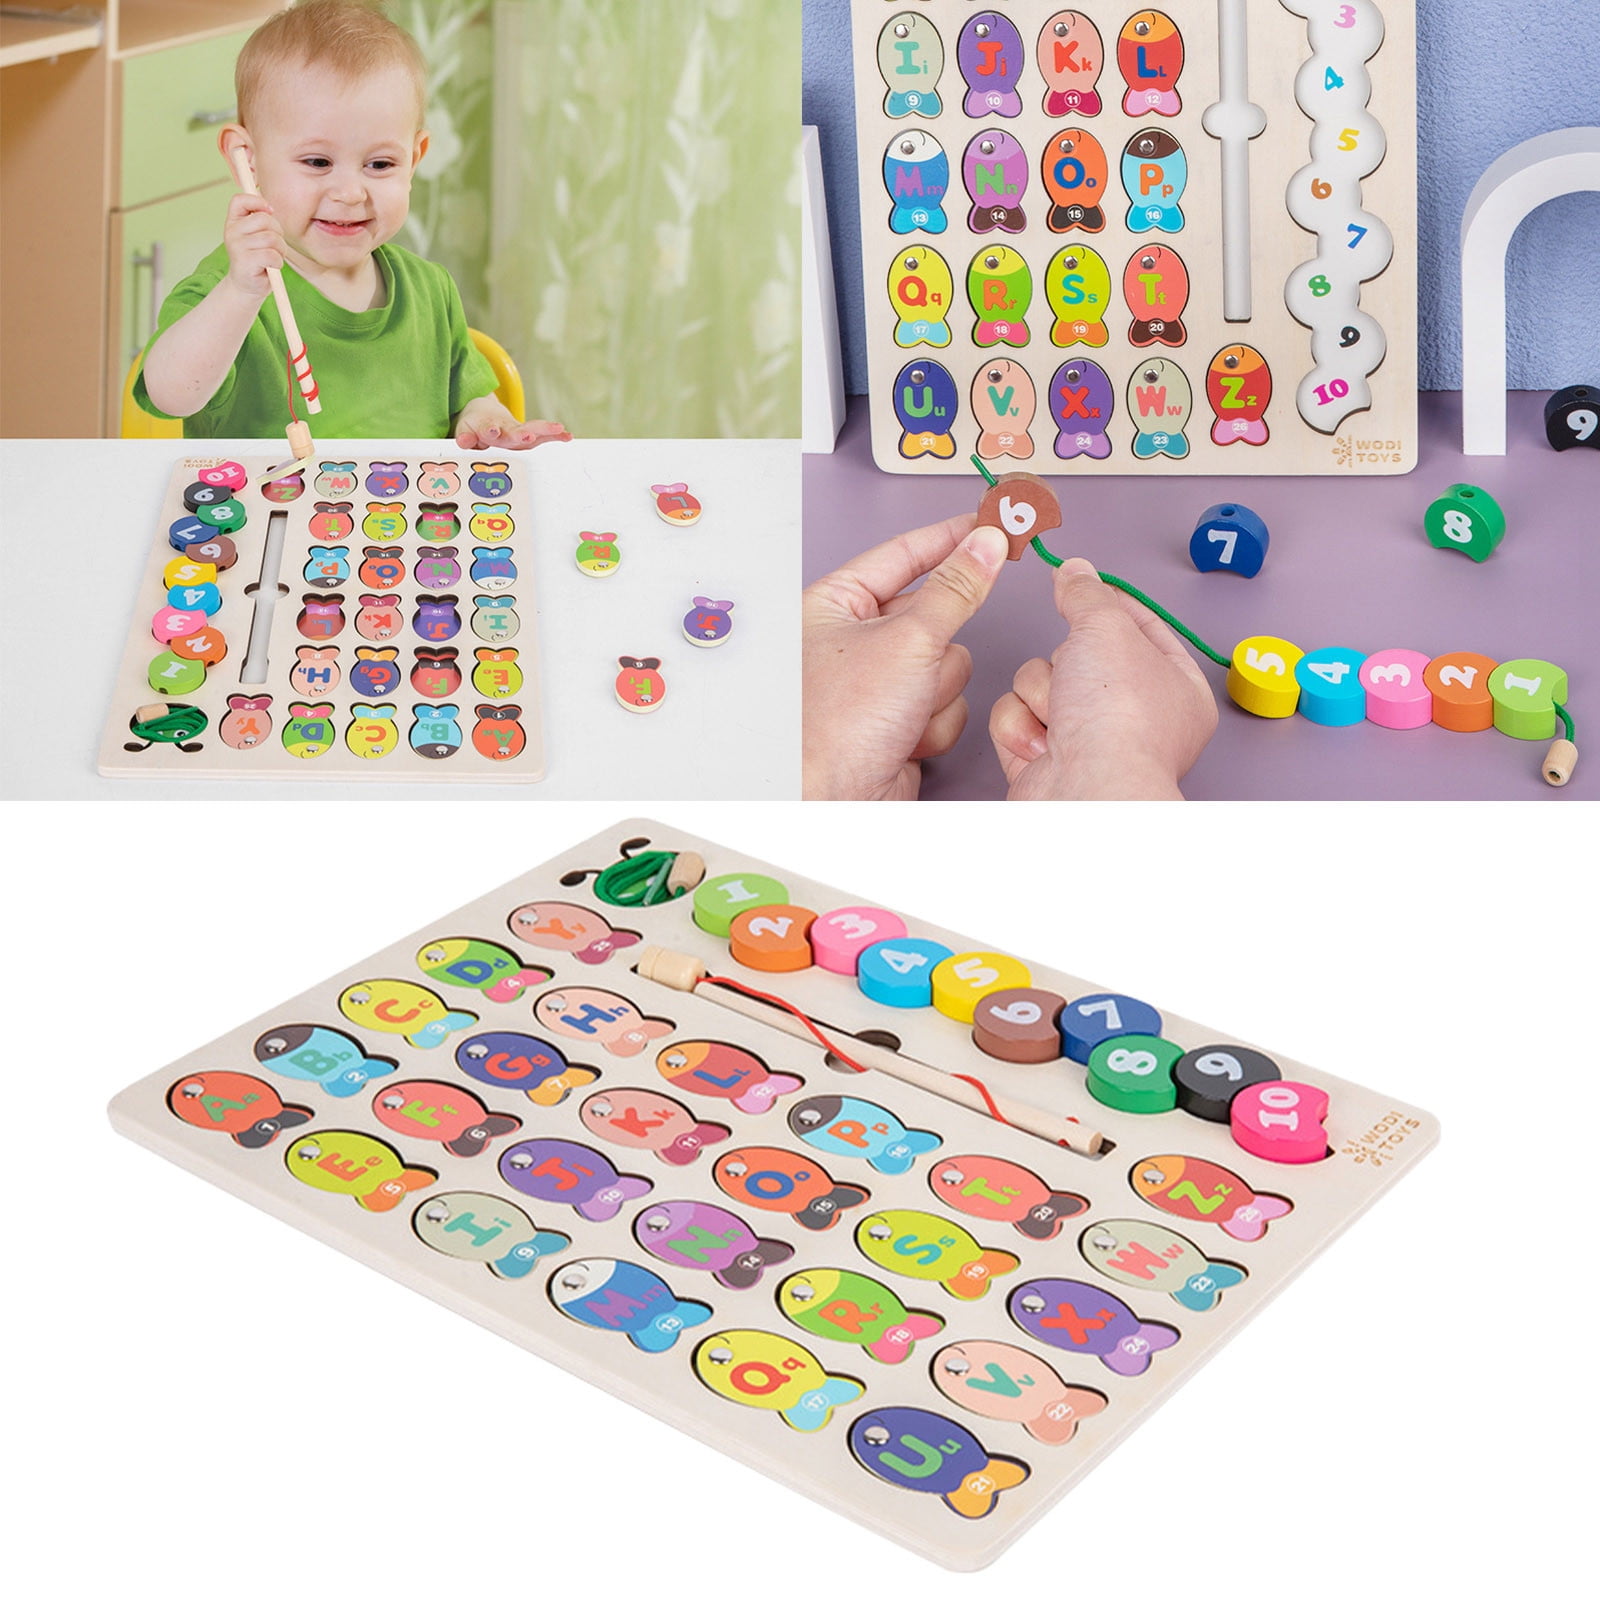 Wooden Fishing Game Toy For Toddlers Alphabet ABC Fish Catching Counting  Learning Education Math Preschool Board Games Toys Gifts 